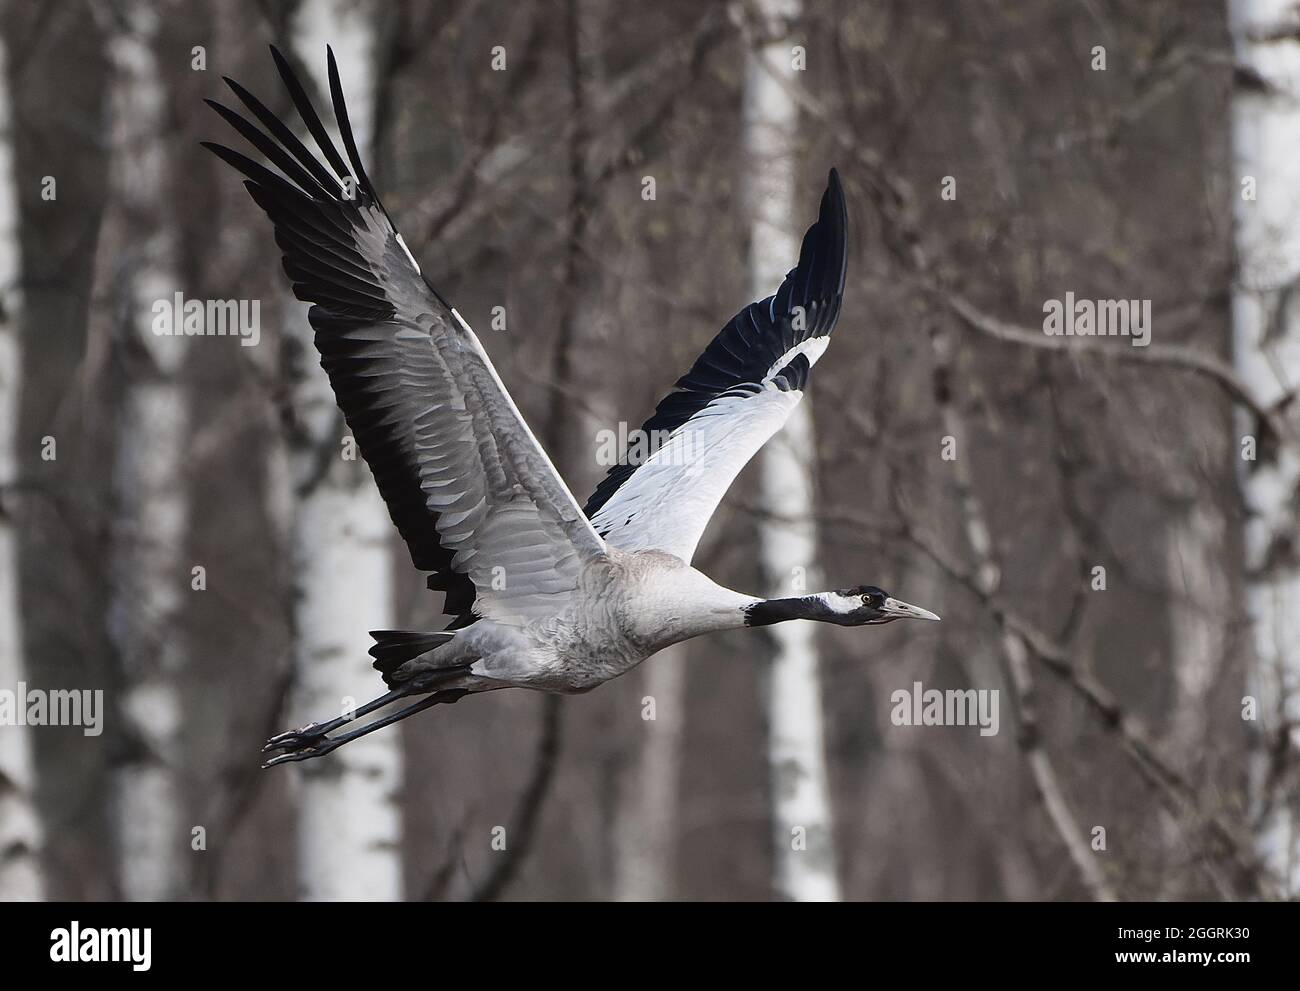 Common Crane (Eurasian crane) flying in the leafless forest with birch trees visible on the background beginning of May in Western Finland. Stock Photo